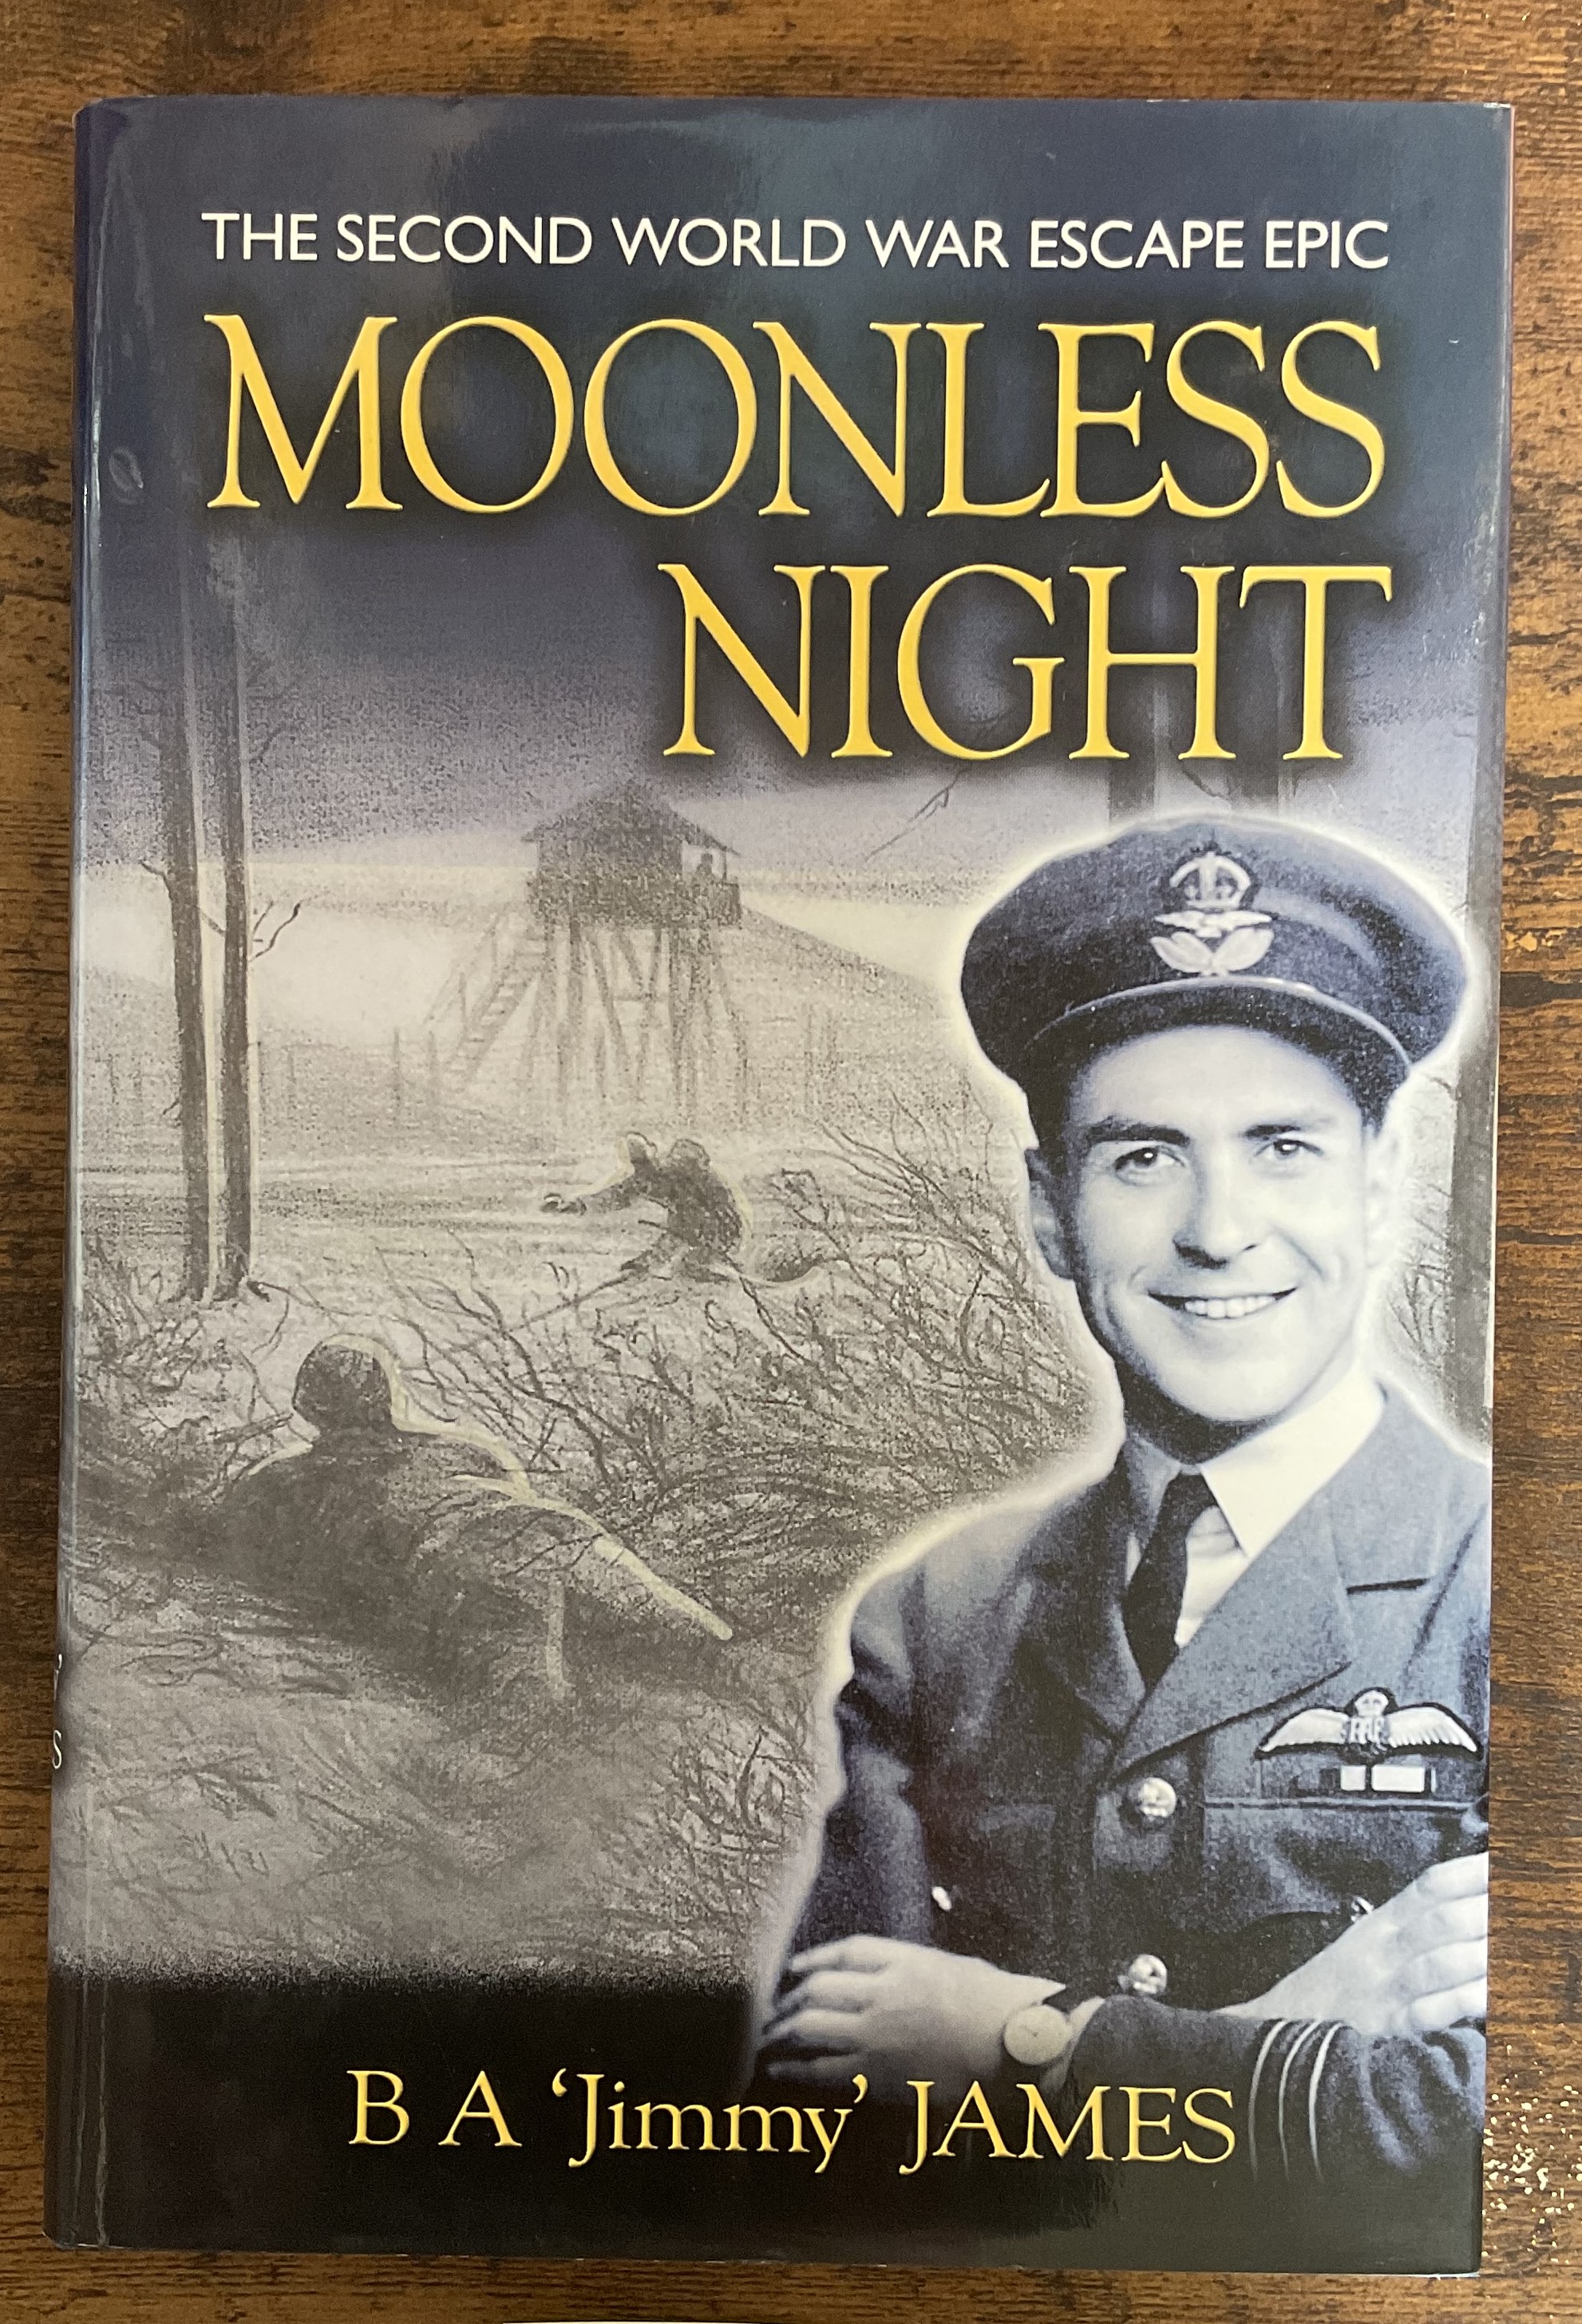 B.A. 'Jimmy' James Hardback Book Titled Moonless Night. Published in 2001 by Leo Cooper. 224